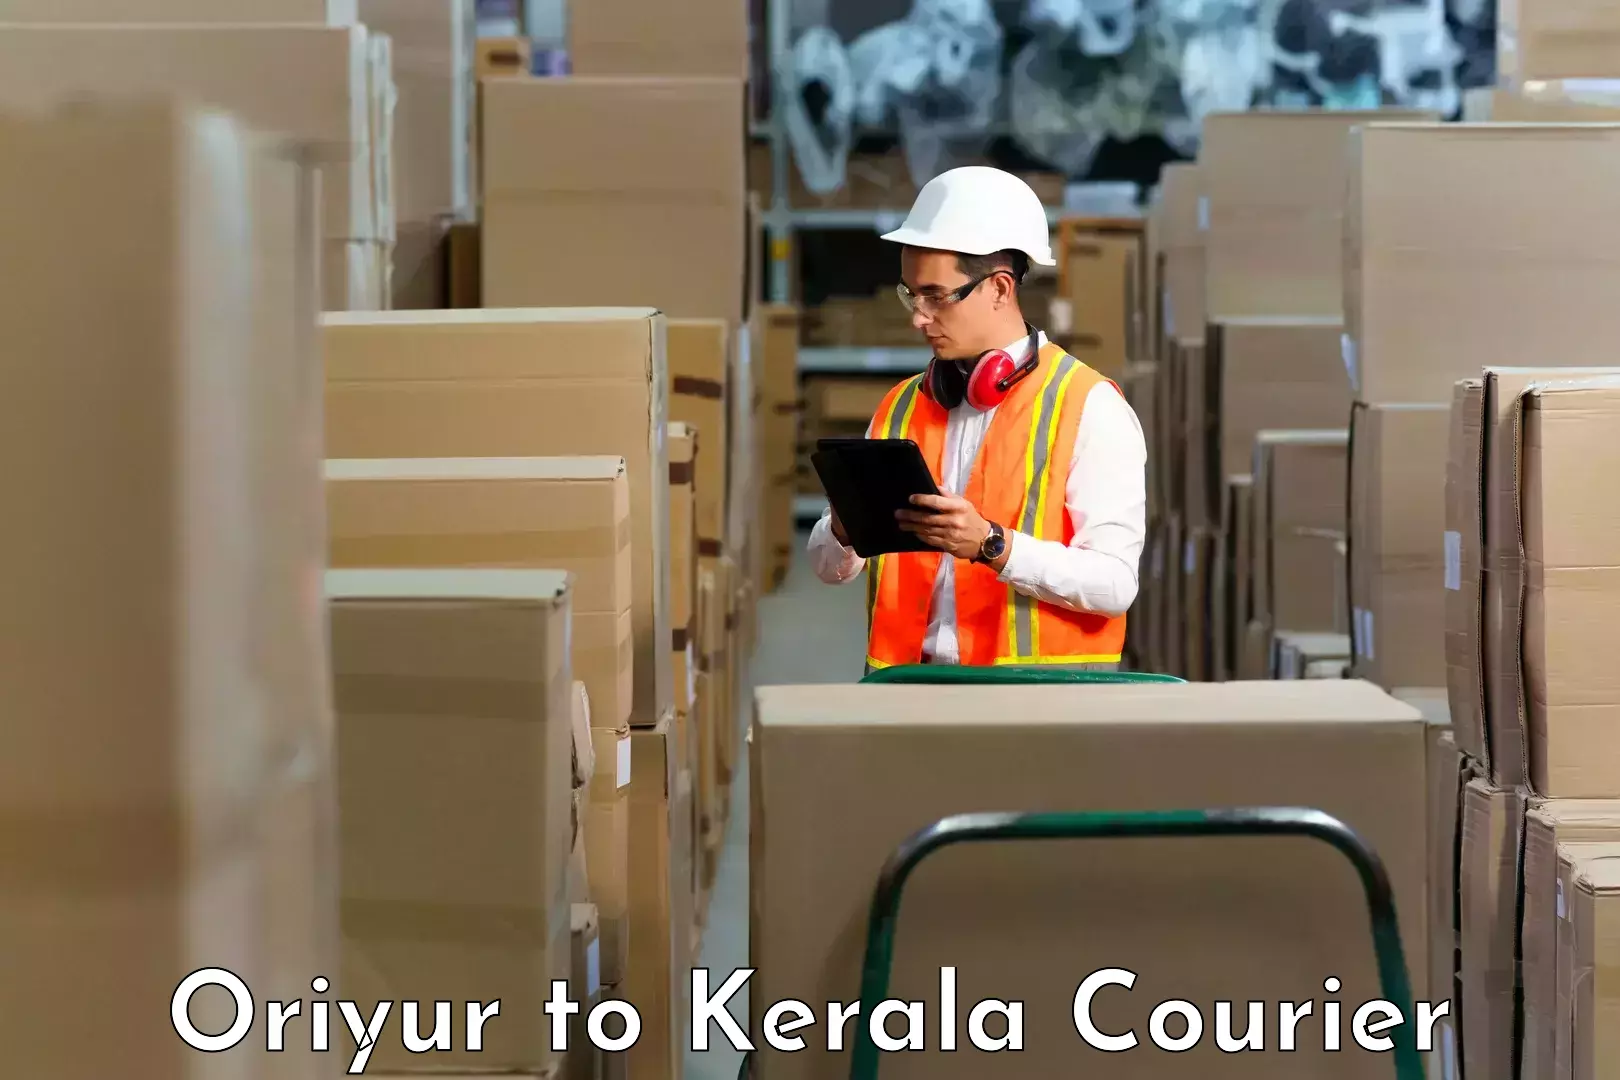 Express delivery capabilities Oriyur to Kozhikode